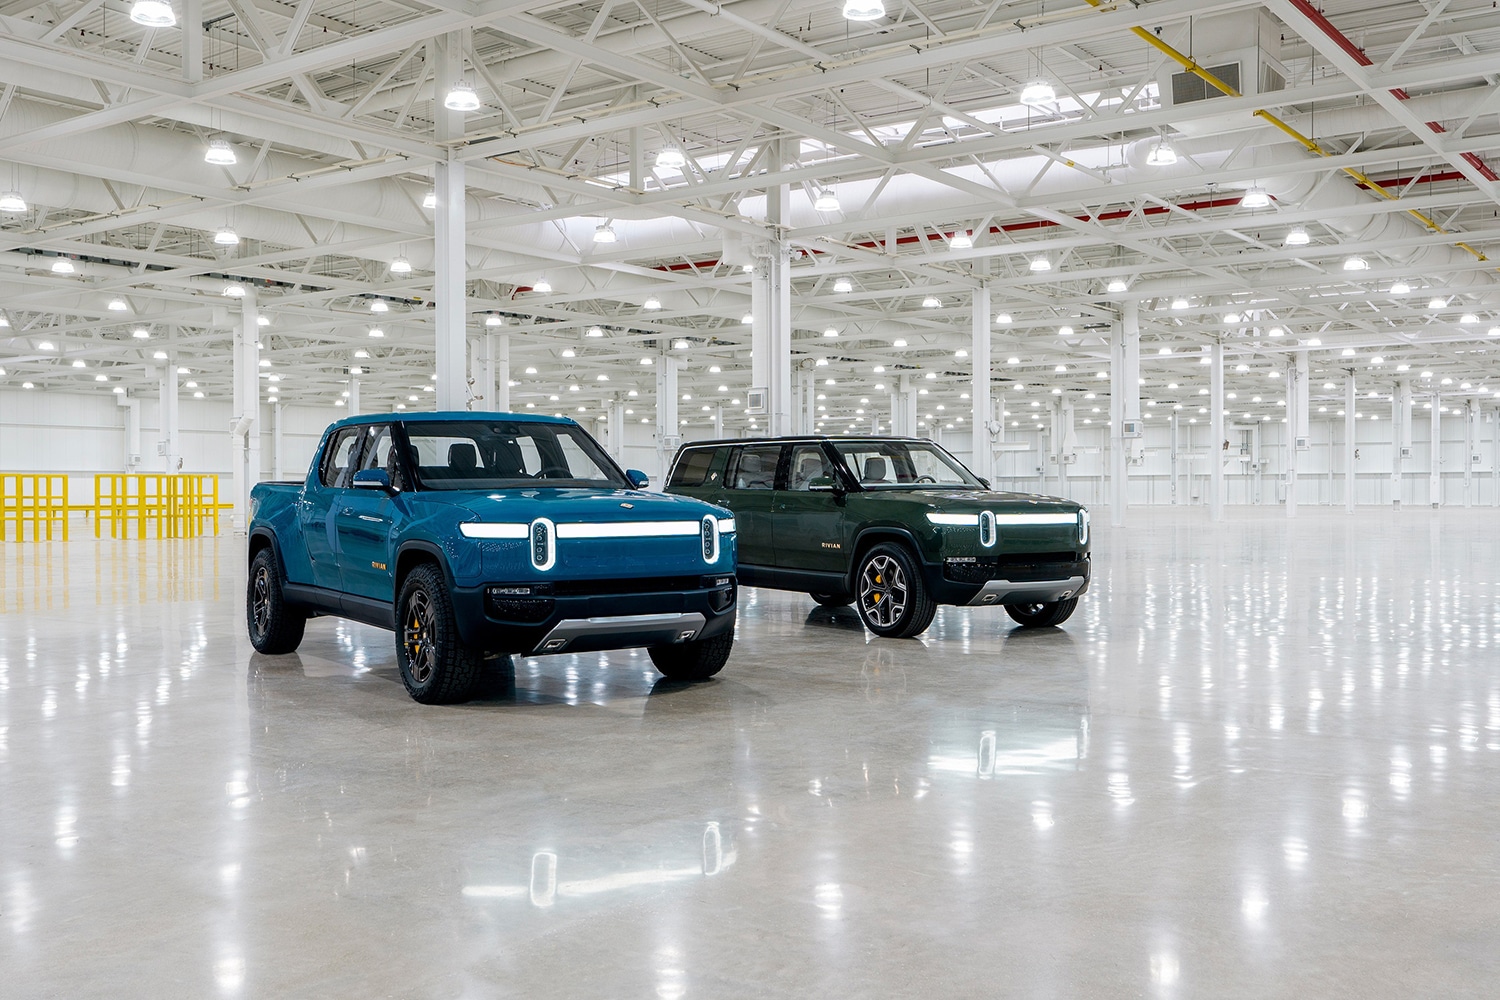 The Rivian R1T and R1S